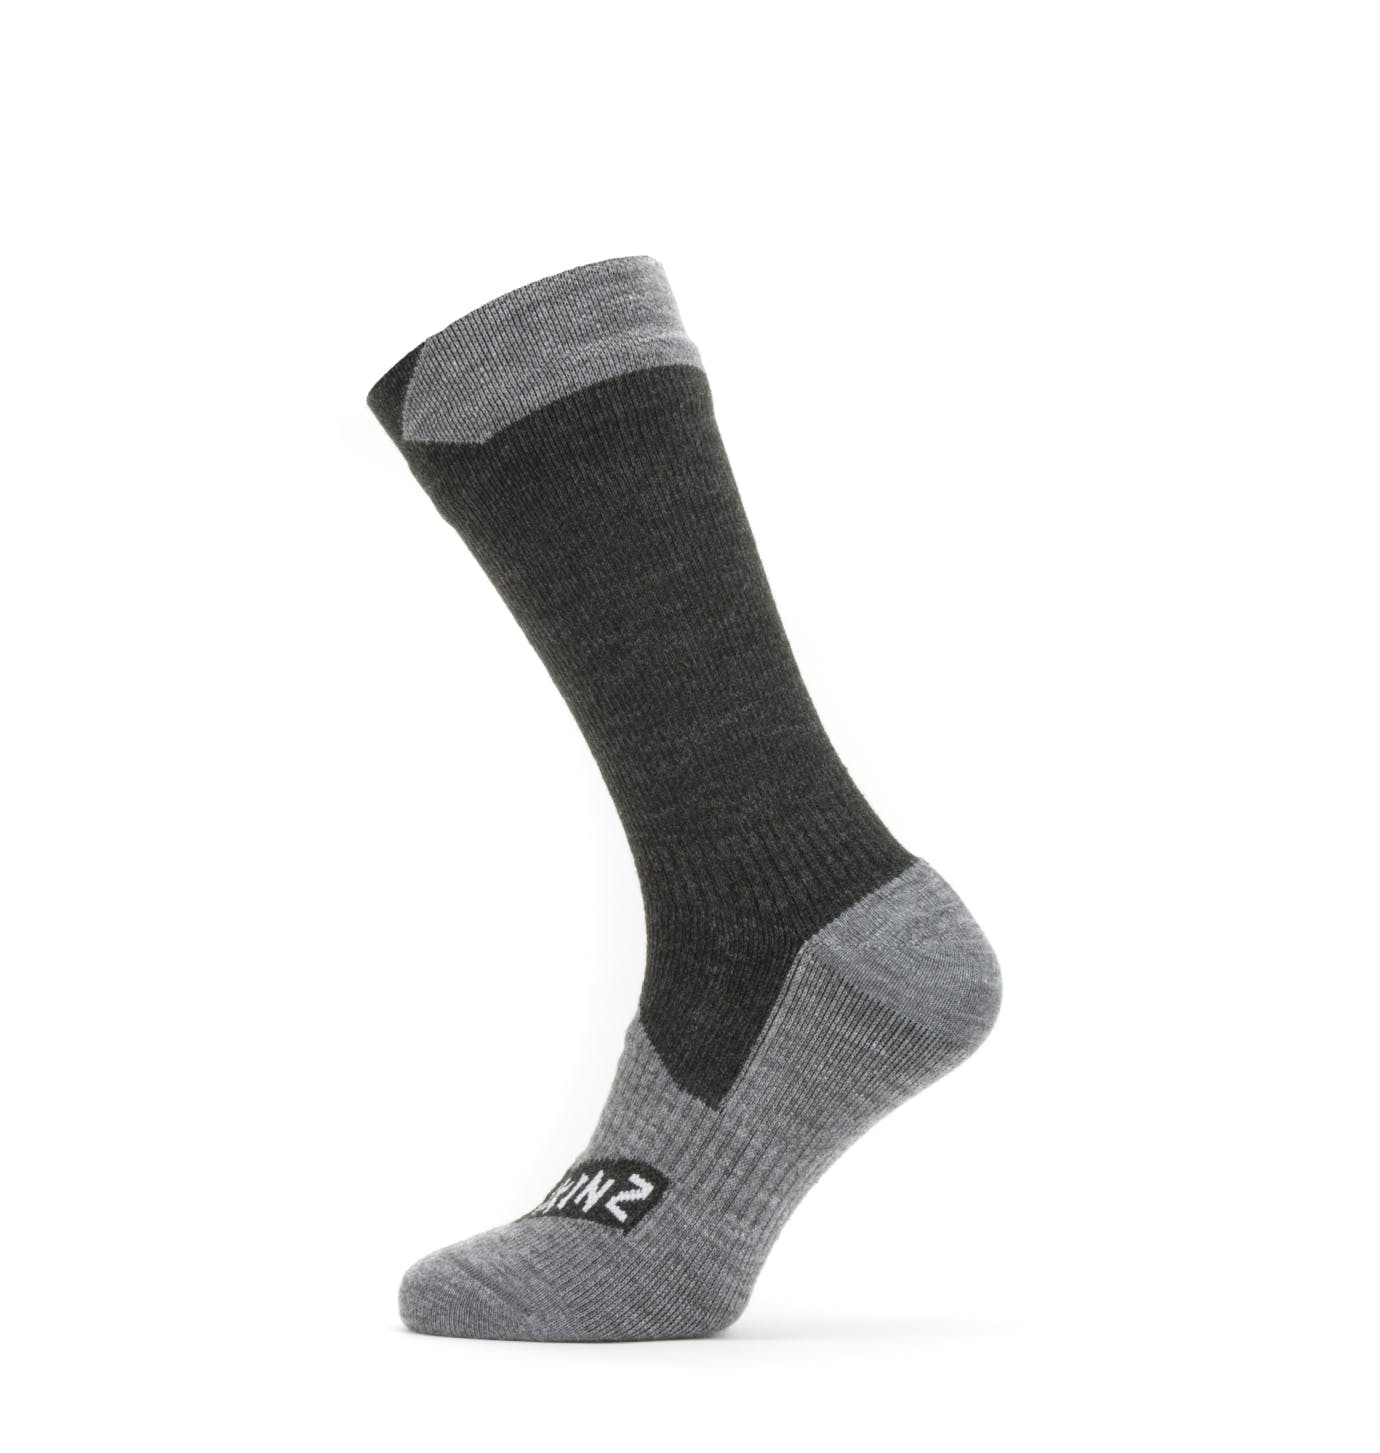 Waterproof All Weather Mid Length Sock - Size: S - Color: